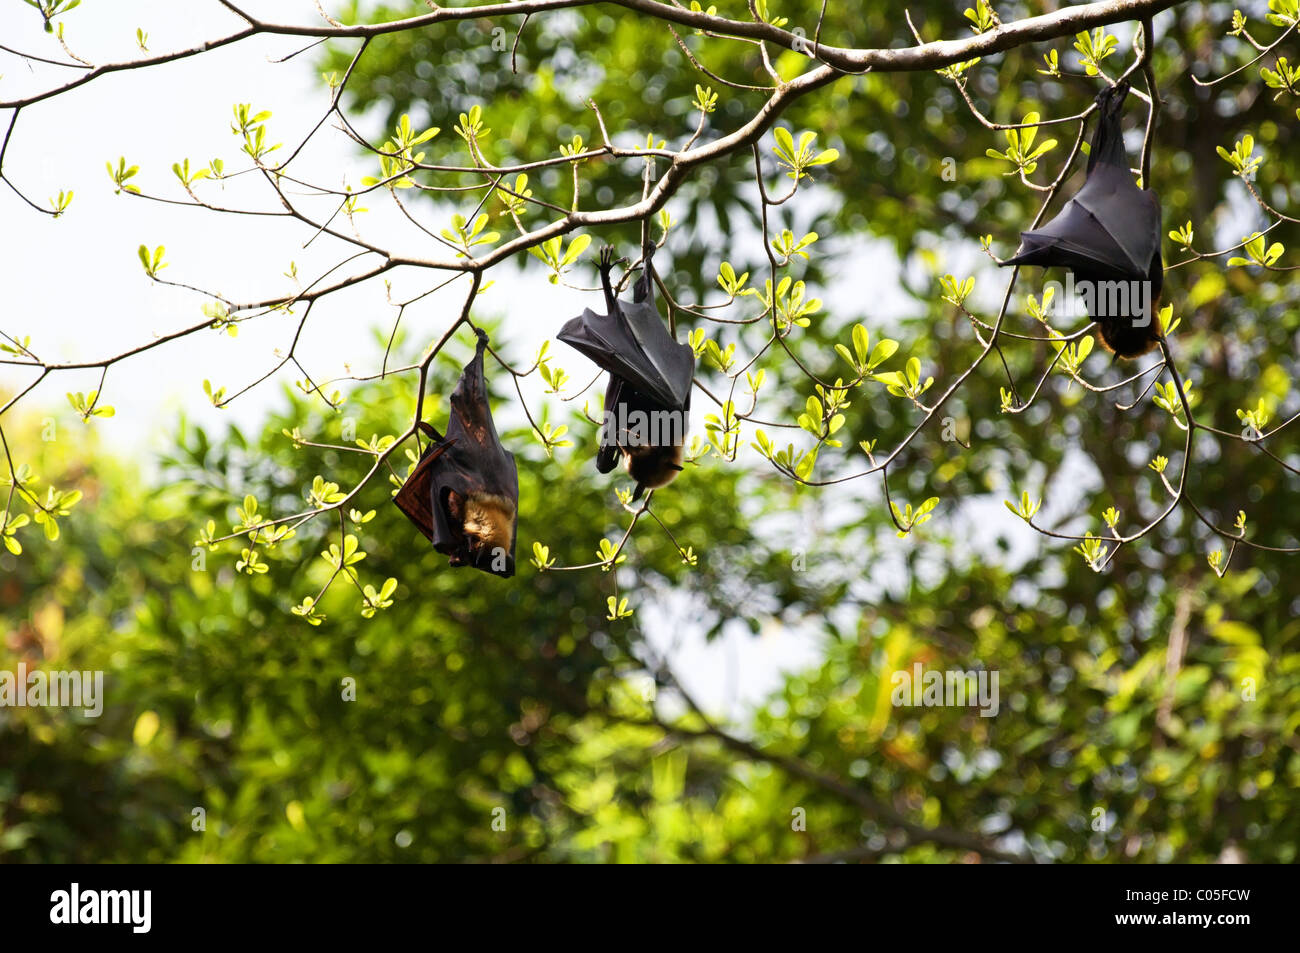 Fruit bats hanging on a limb during the day Stock Photo